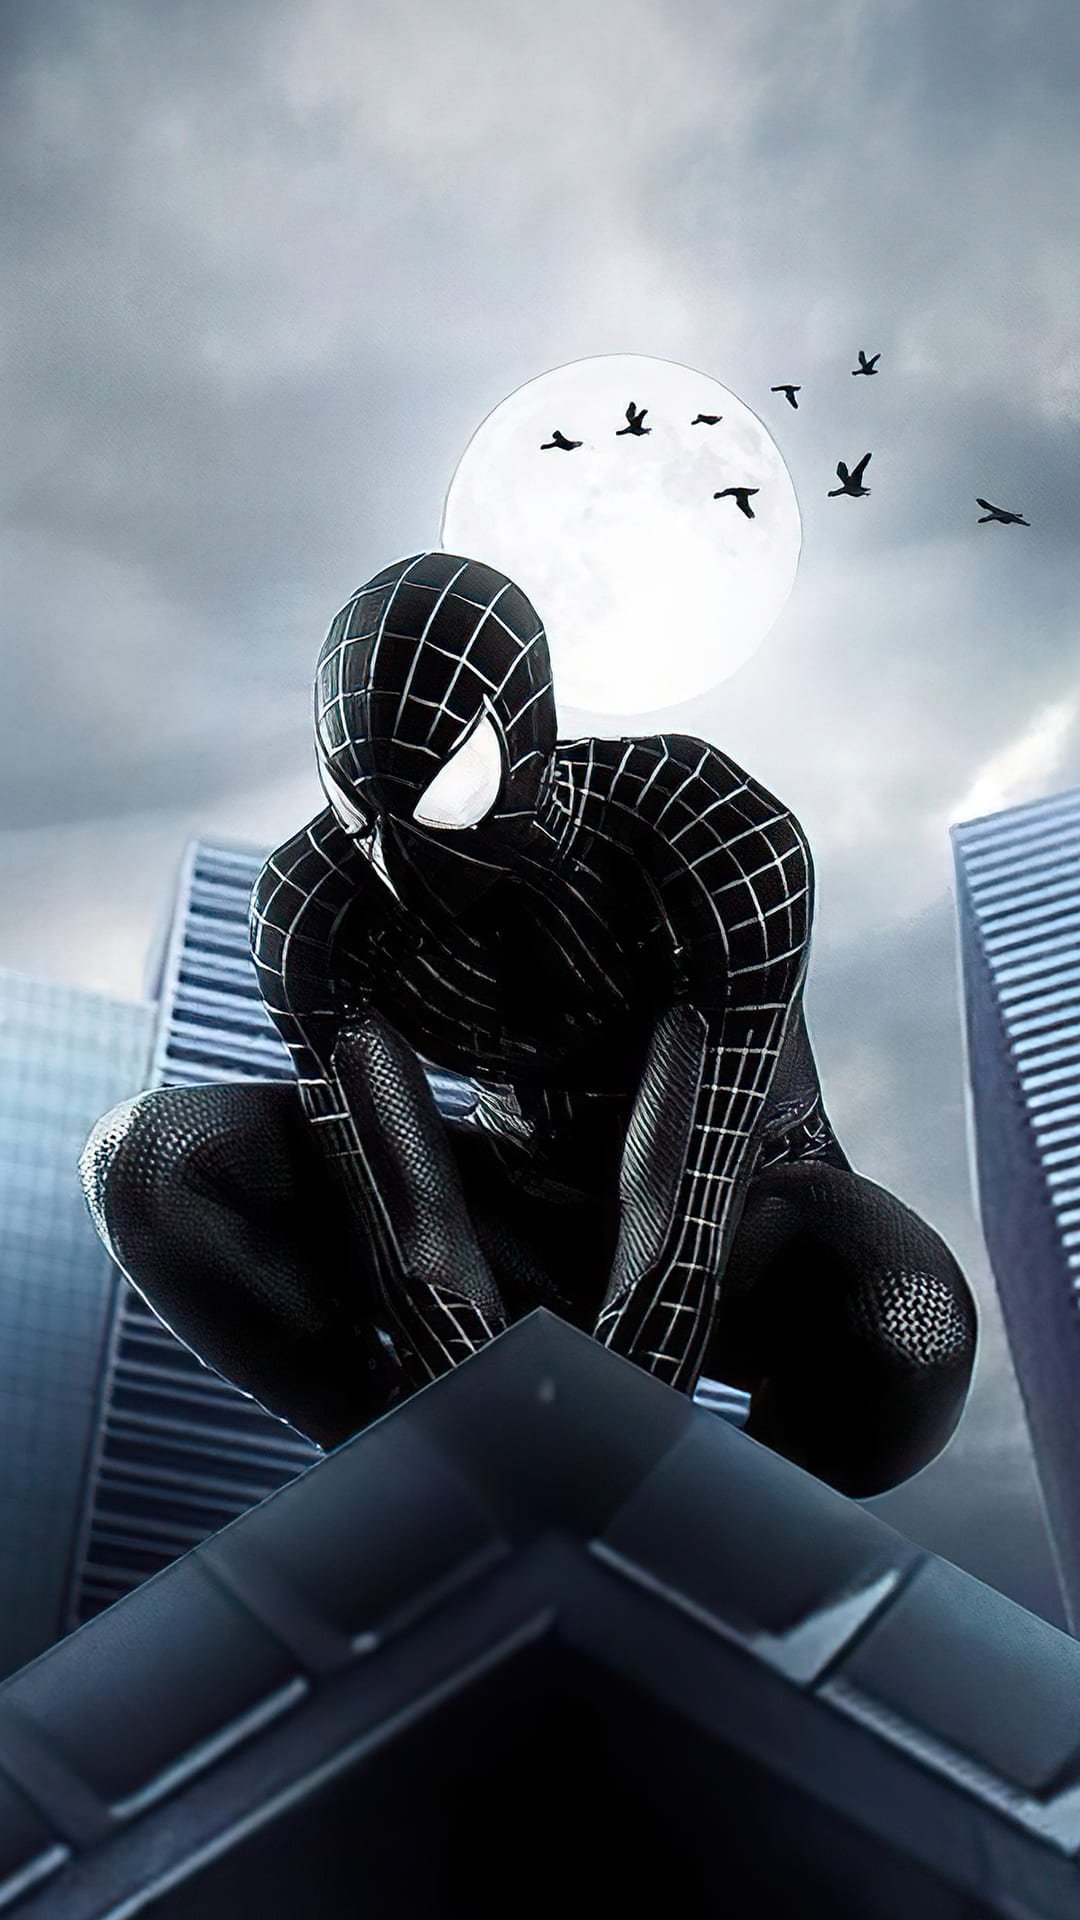 4k Black Spiderman wallpaper on the Roof iPhone backgound